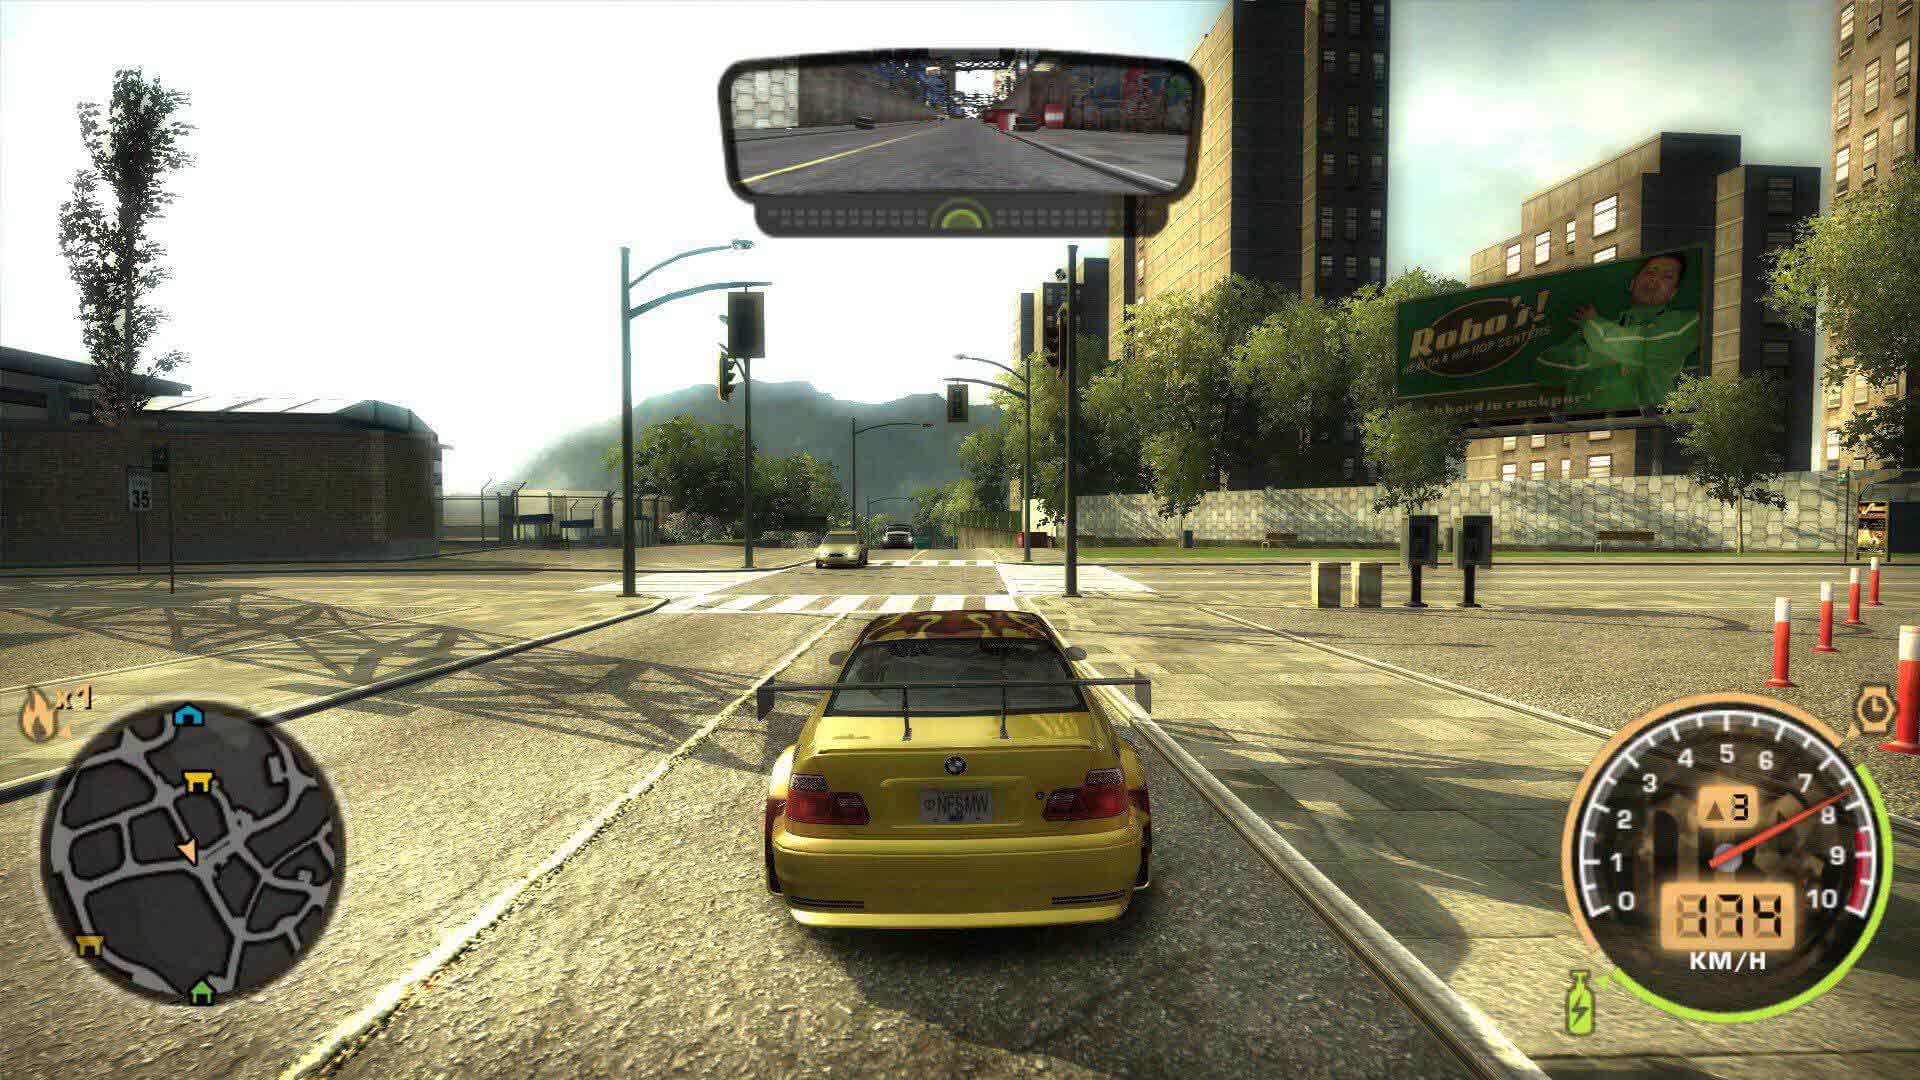 Играть игру м 1. Need for Speed most wanted 2005. Гонки NFS most wanted Black Edition. NFS most wanted 2005 геймплей. Гонки NFS most wanted 2005.